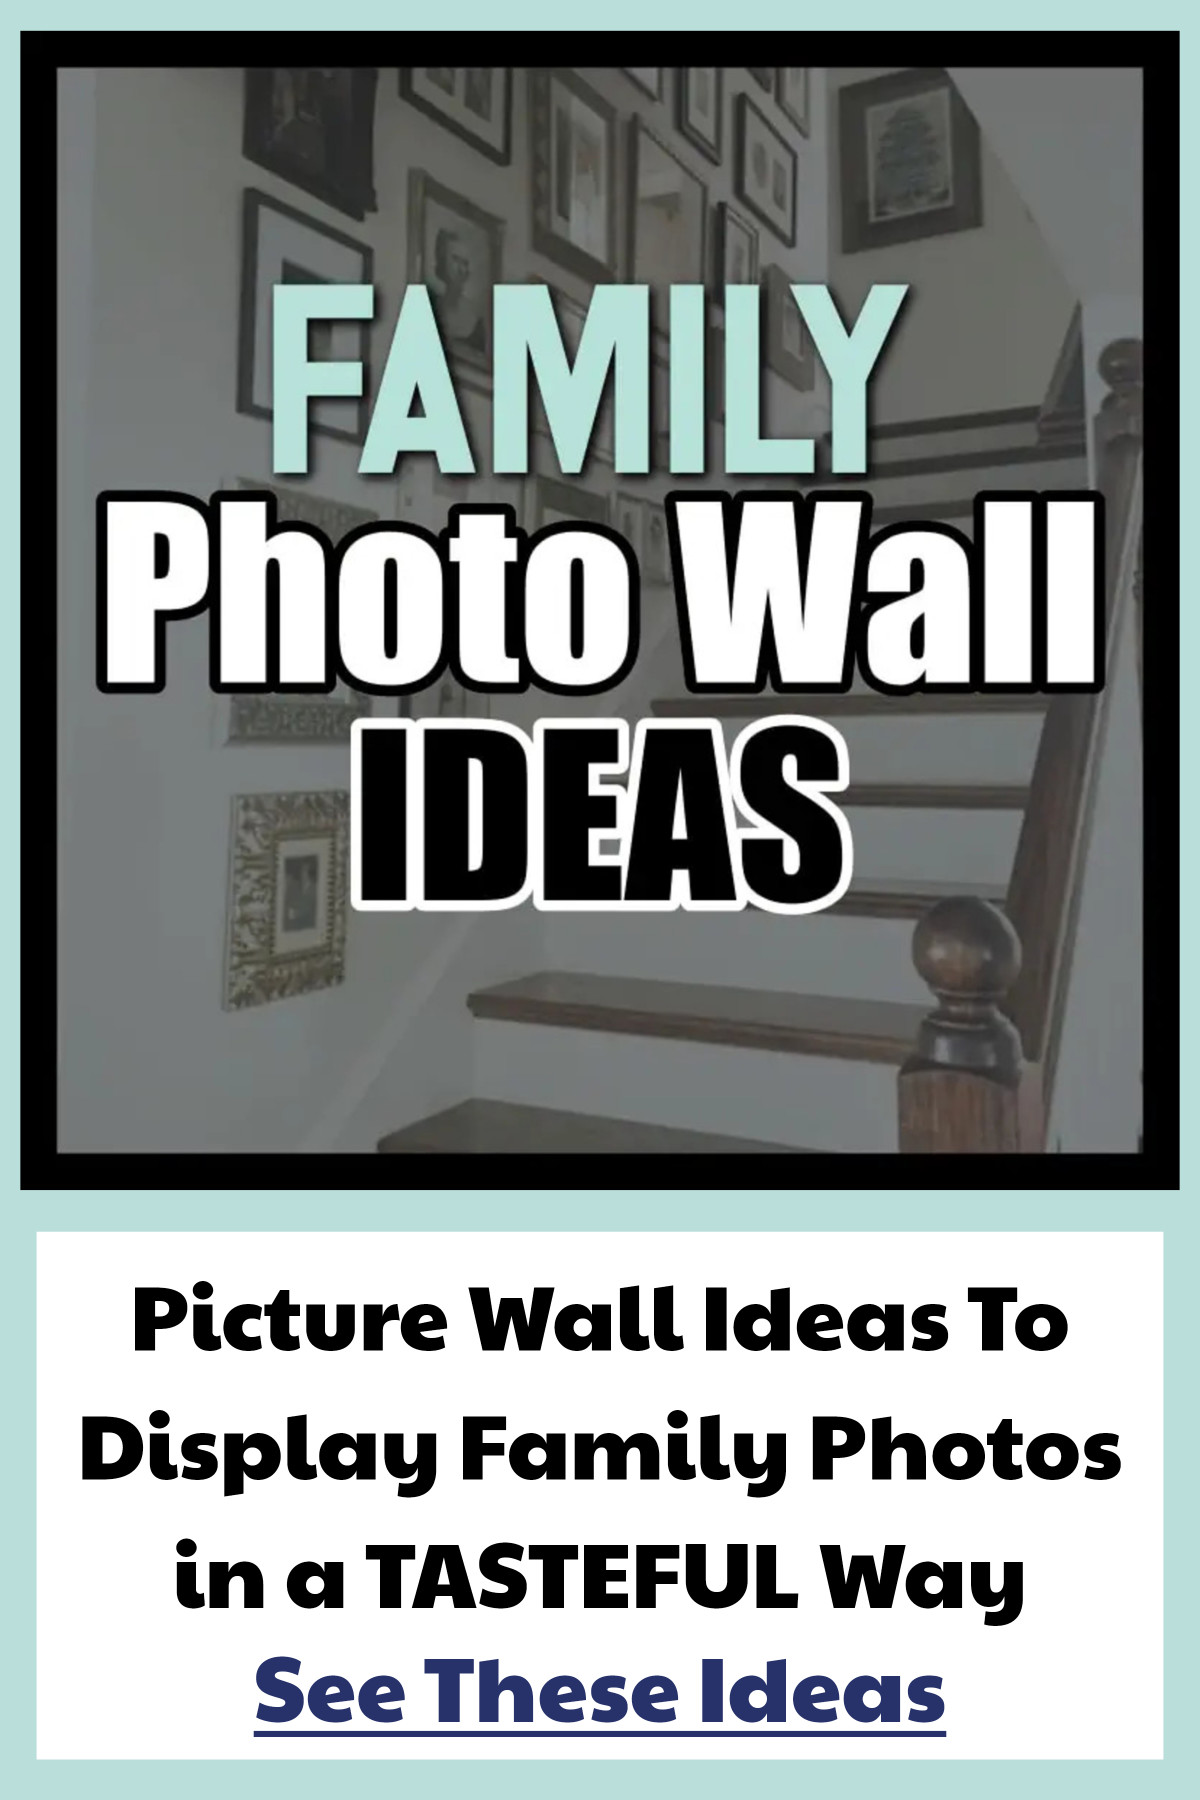 Photo Wall Ideas-Shelves with Photos-Family Picture and Shelf Arrangements on Walls